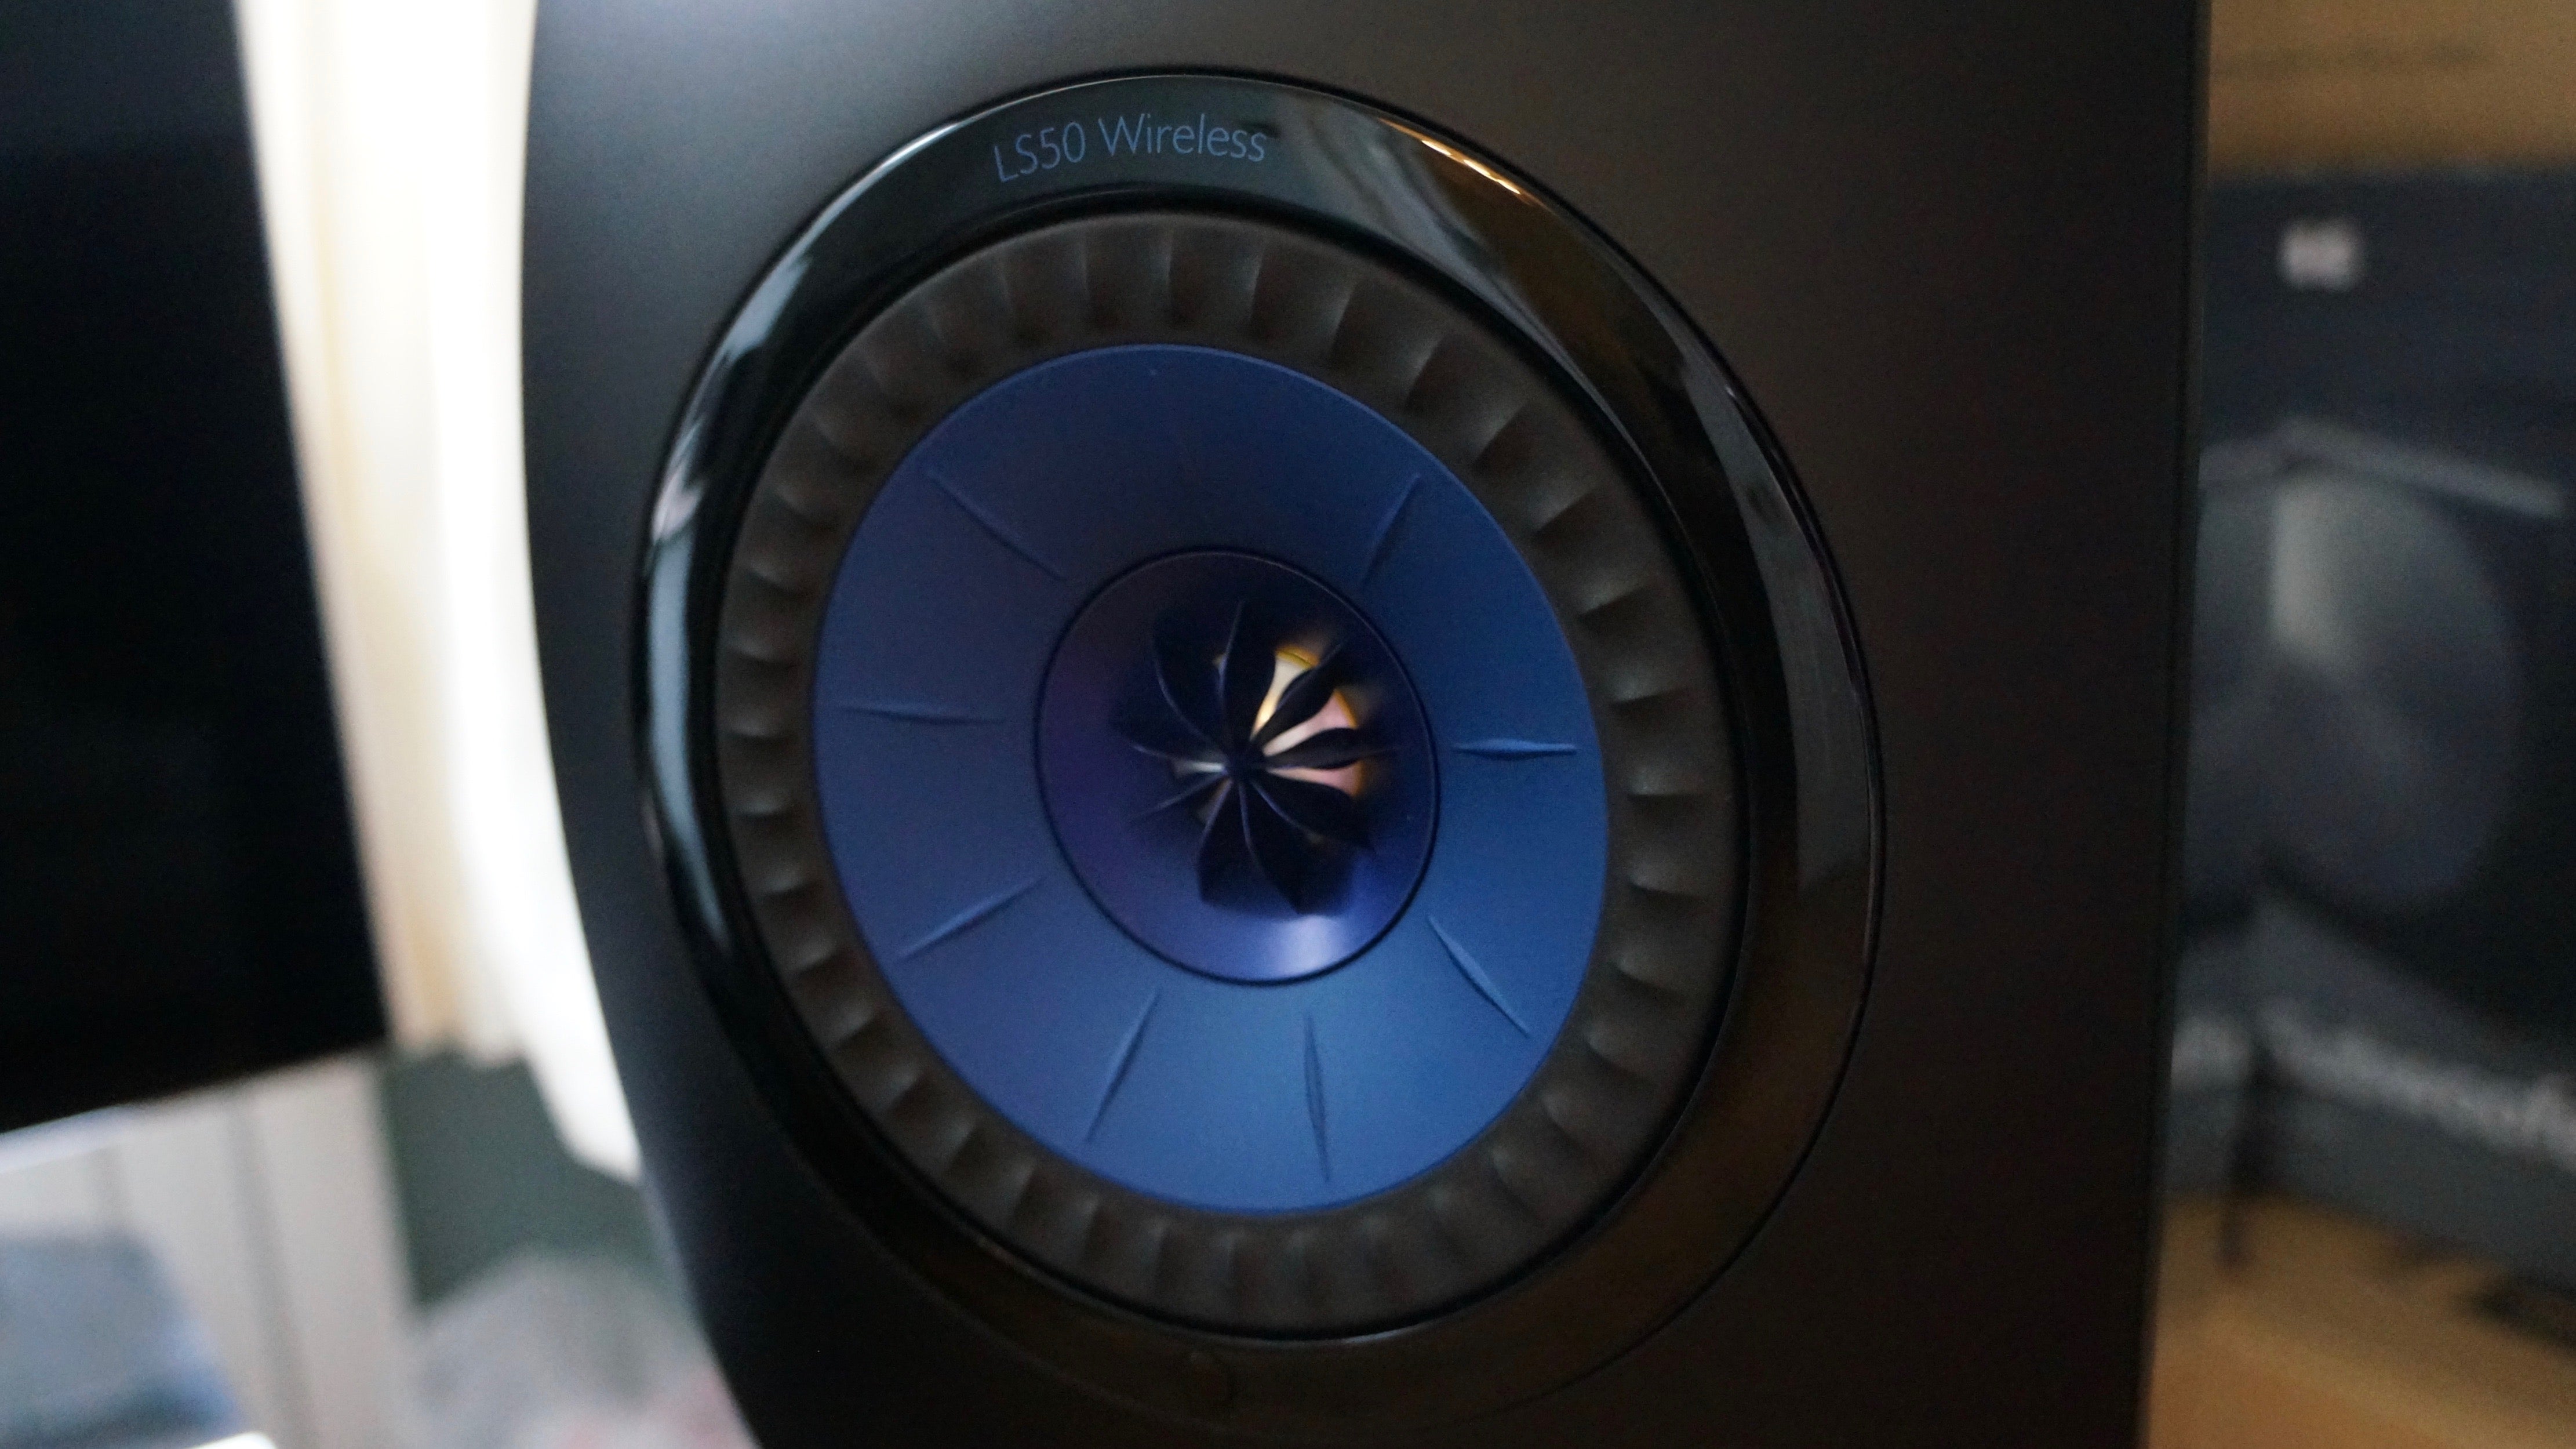 Close-up of a KEF LS50 Wireless speaker driver.